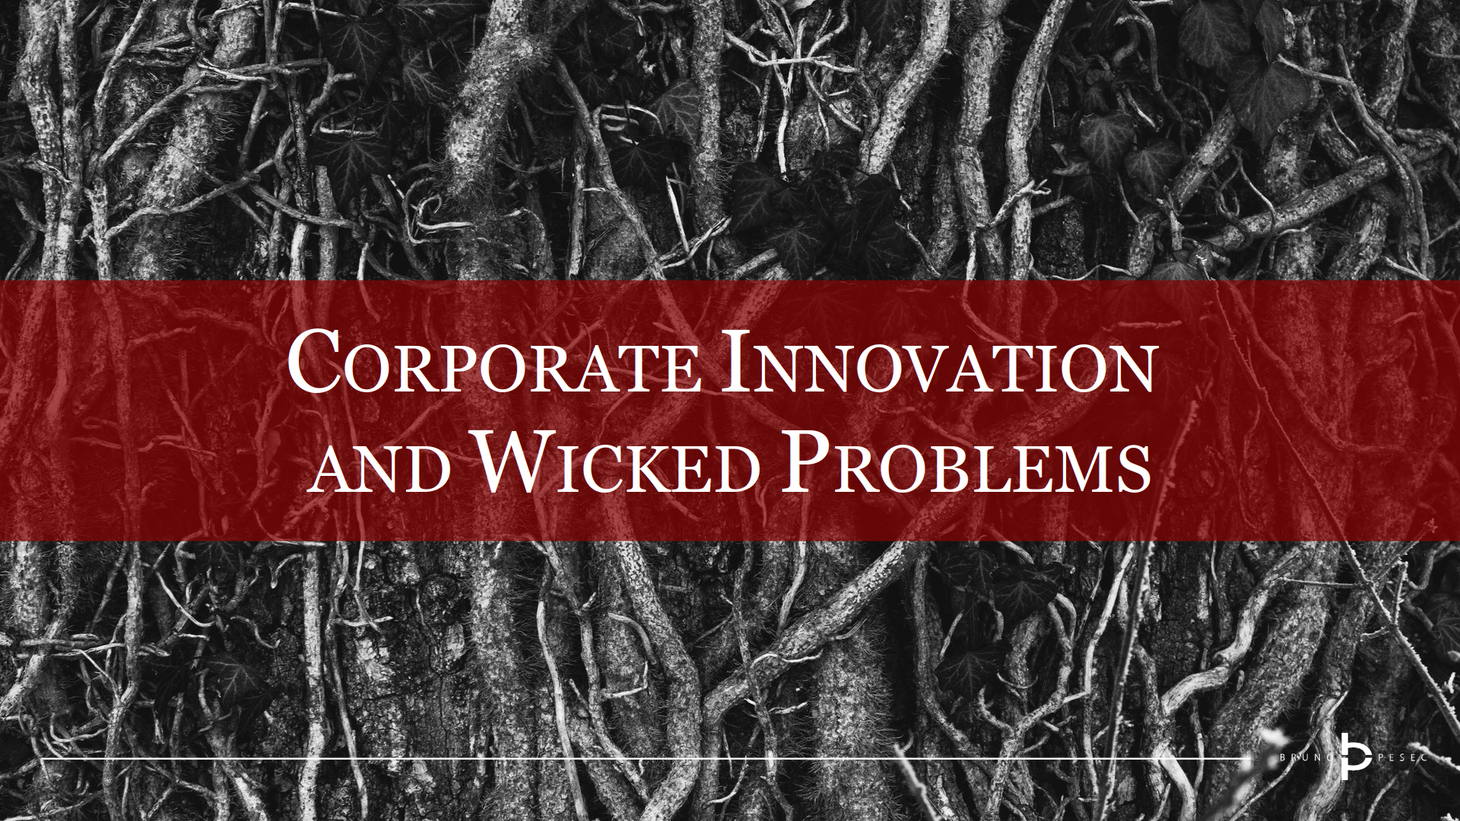 Corporate innovation and wicked problems